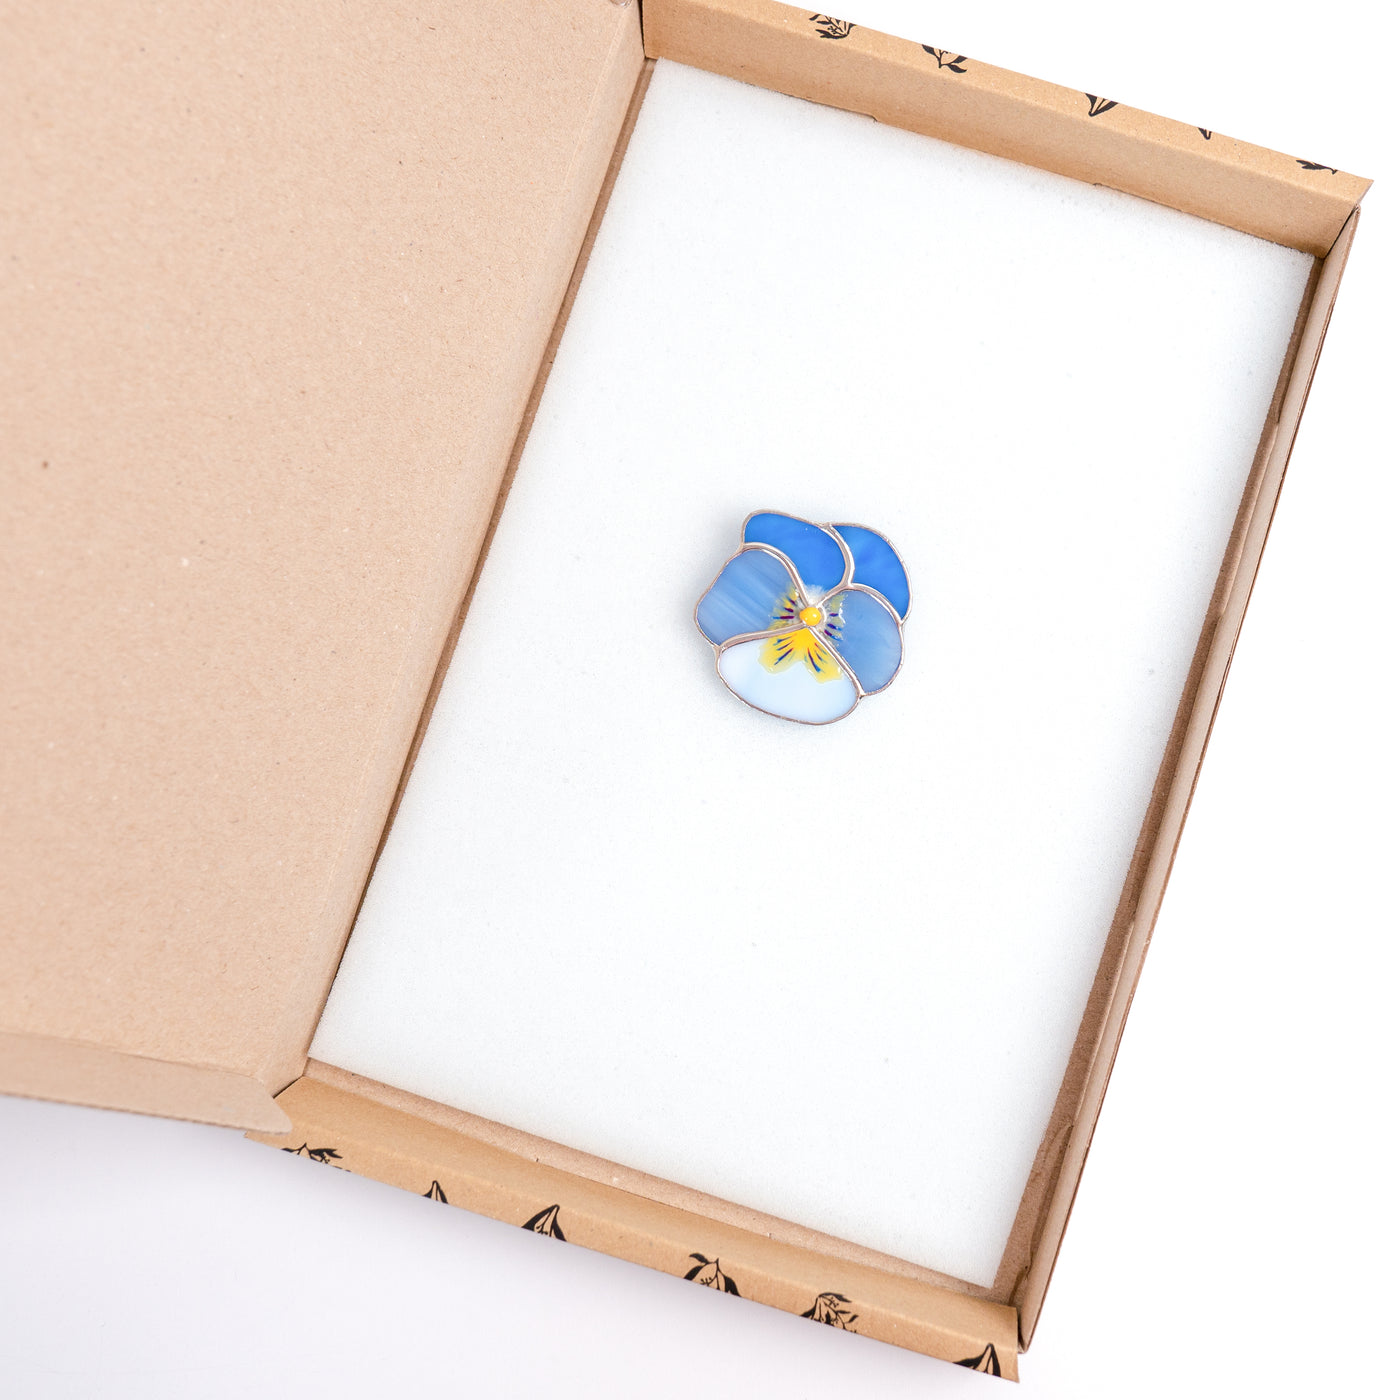 Stained glass blue pansy brooch in a brand box